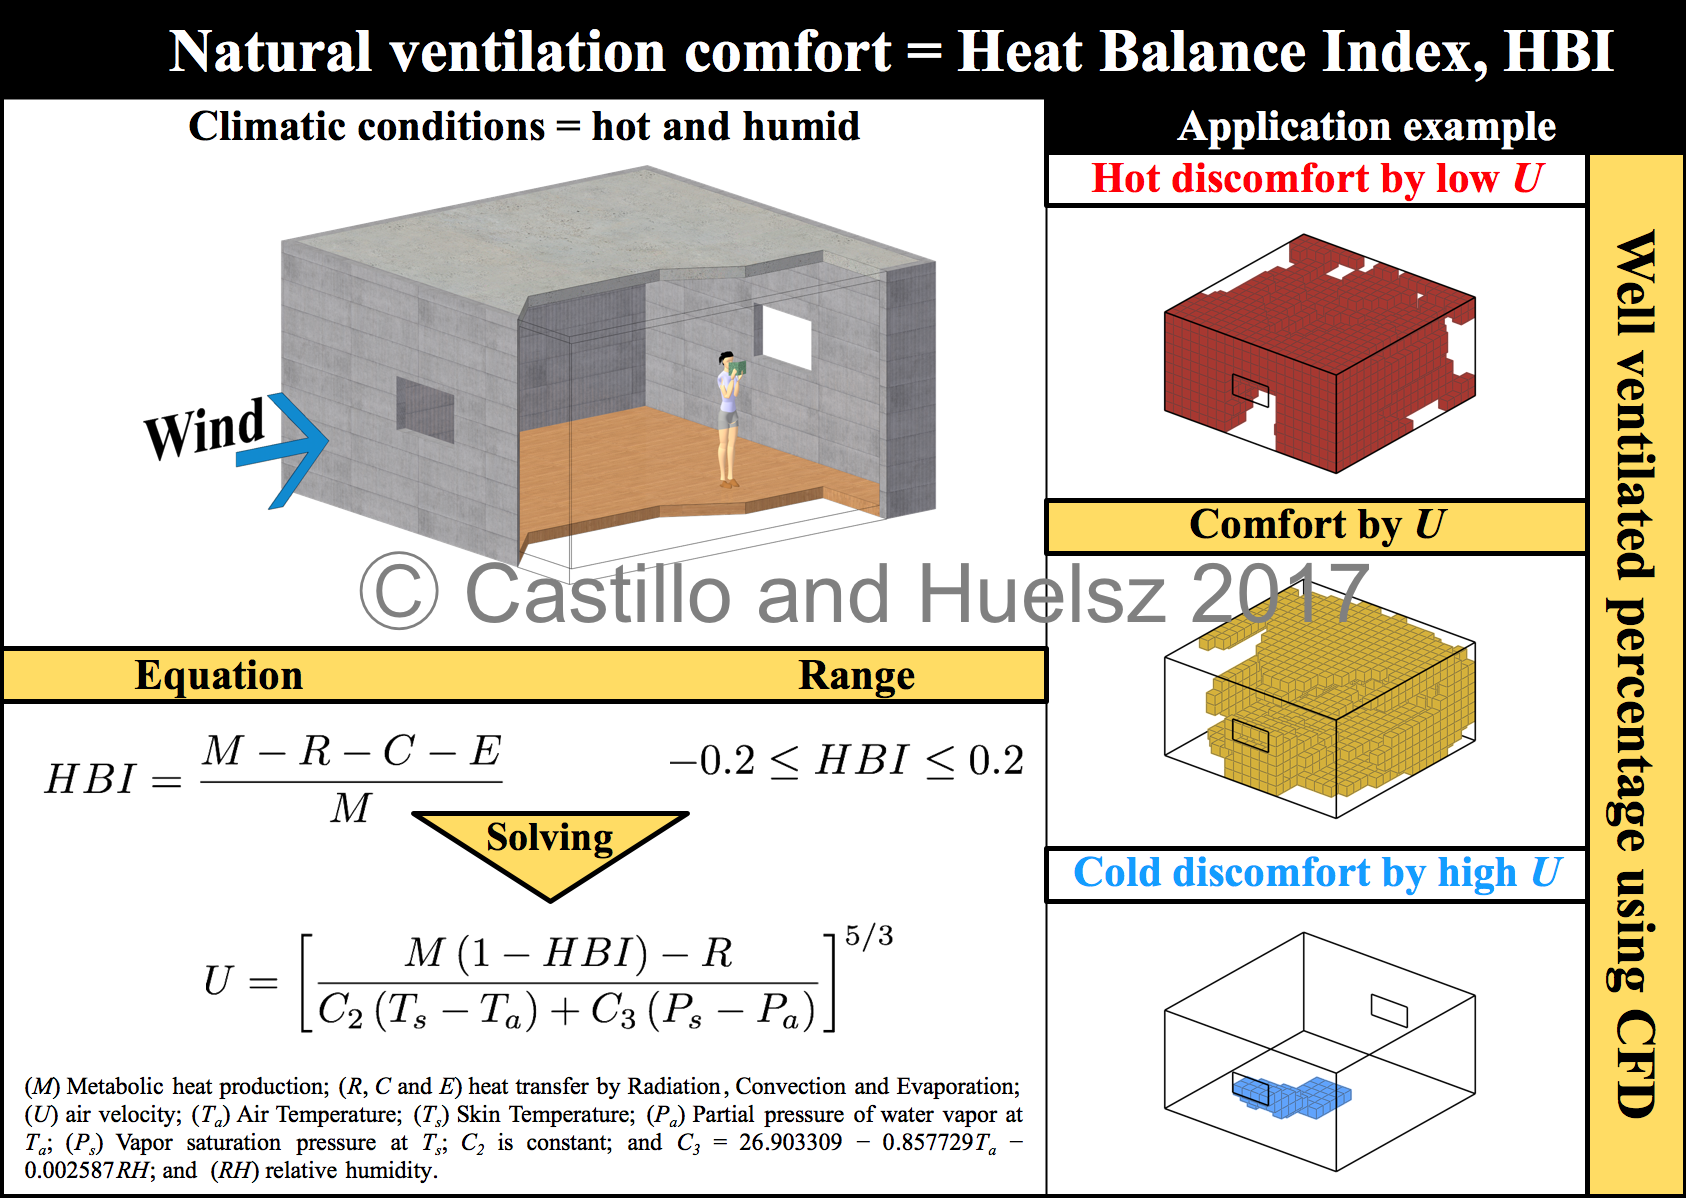 A methodology to evaluate the indoor natural ventilation in hot climates: Heat Balance Index